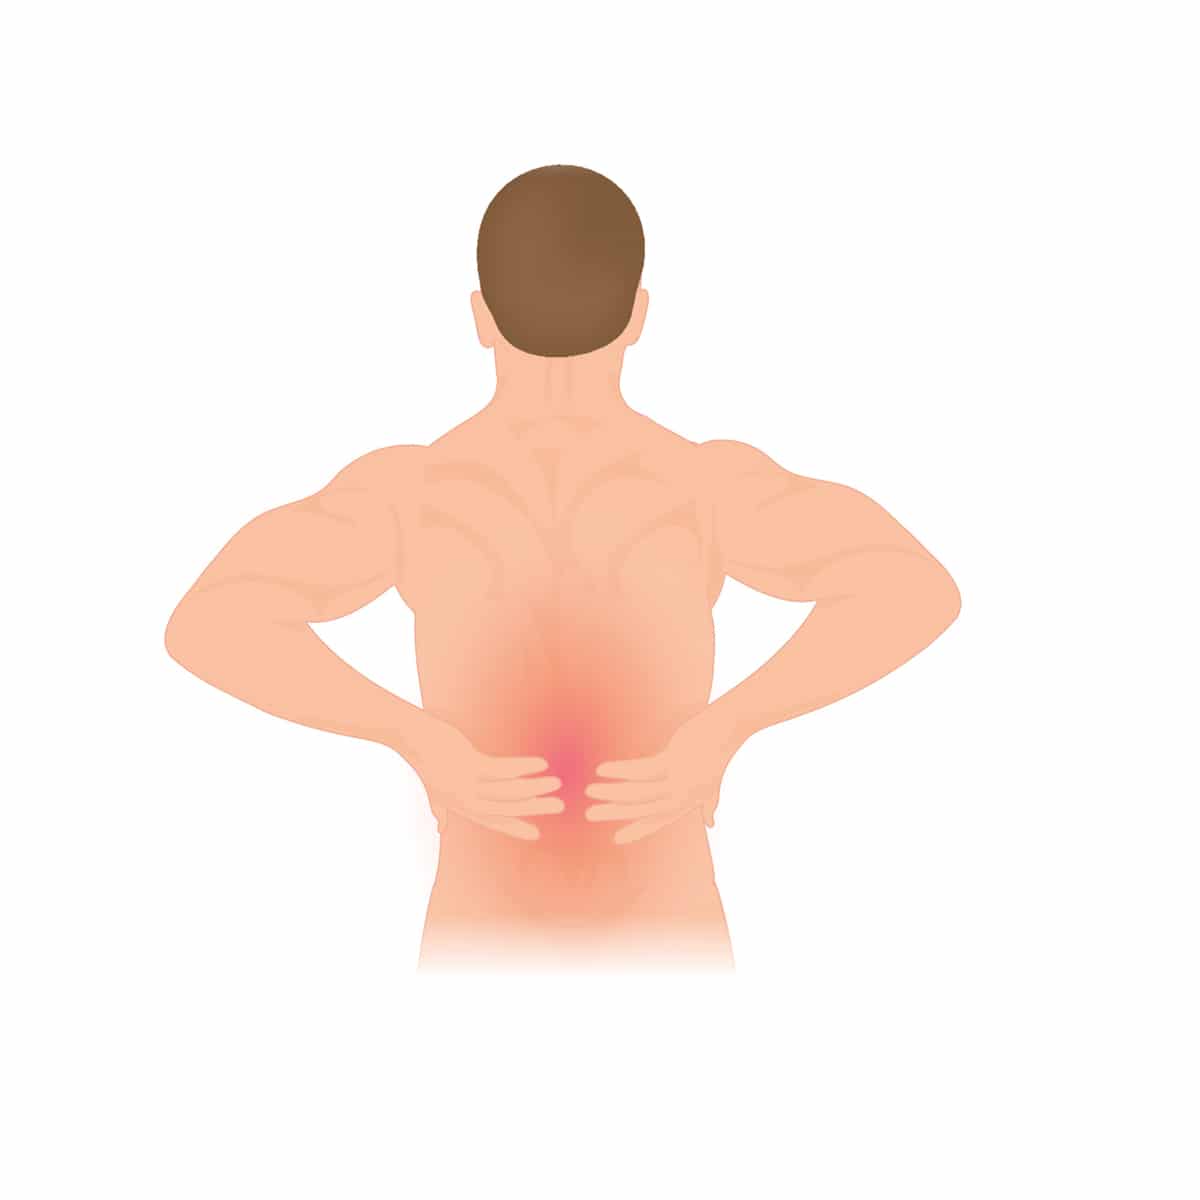 Constipation and back pain